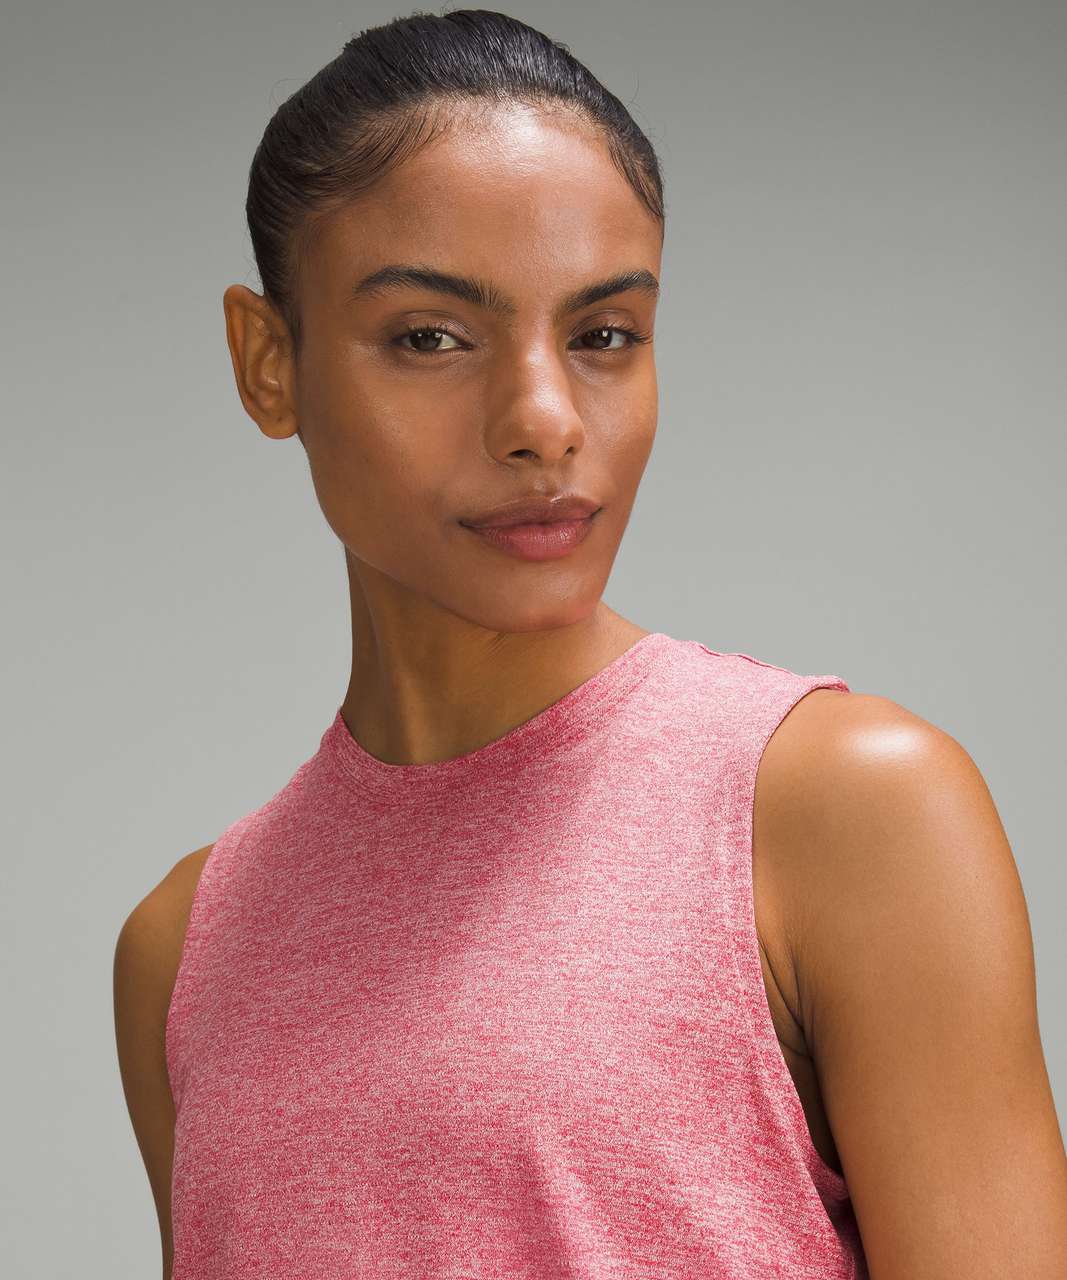 Lululemon License to Train Classic-Fit Tank Top - Heathered Vintage Rose